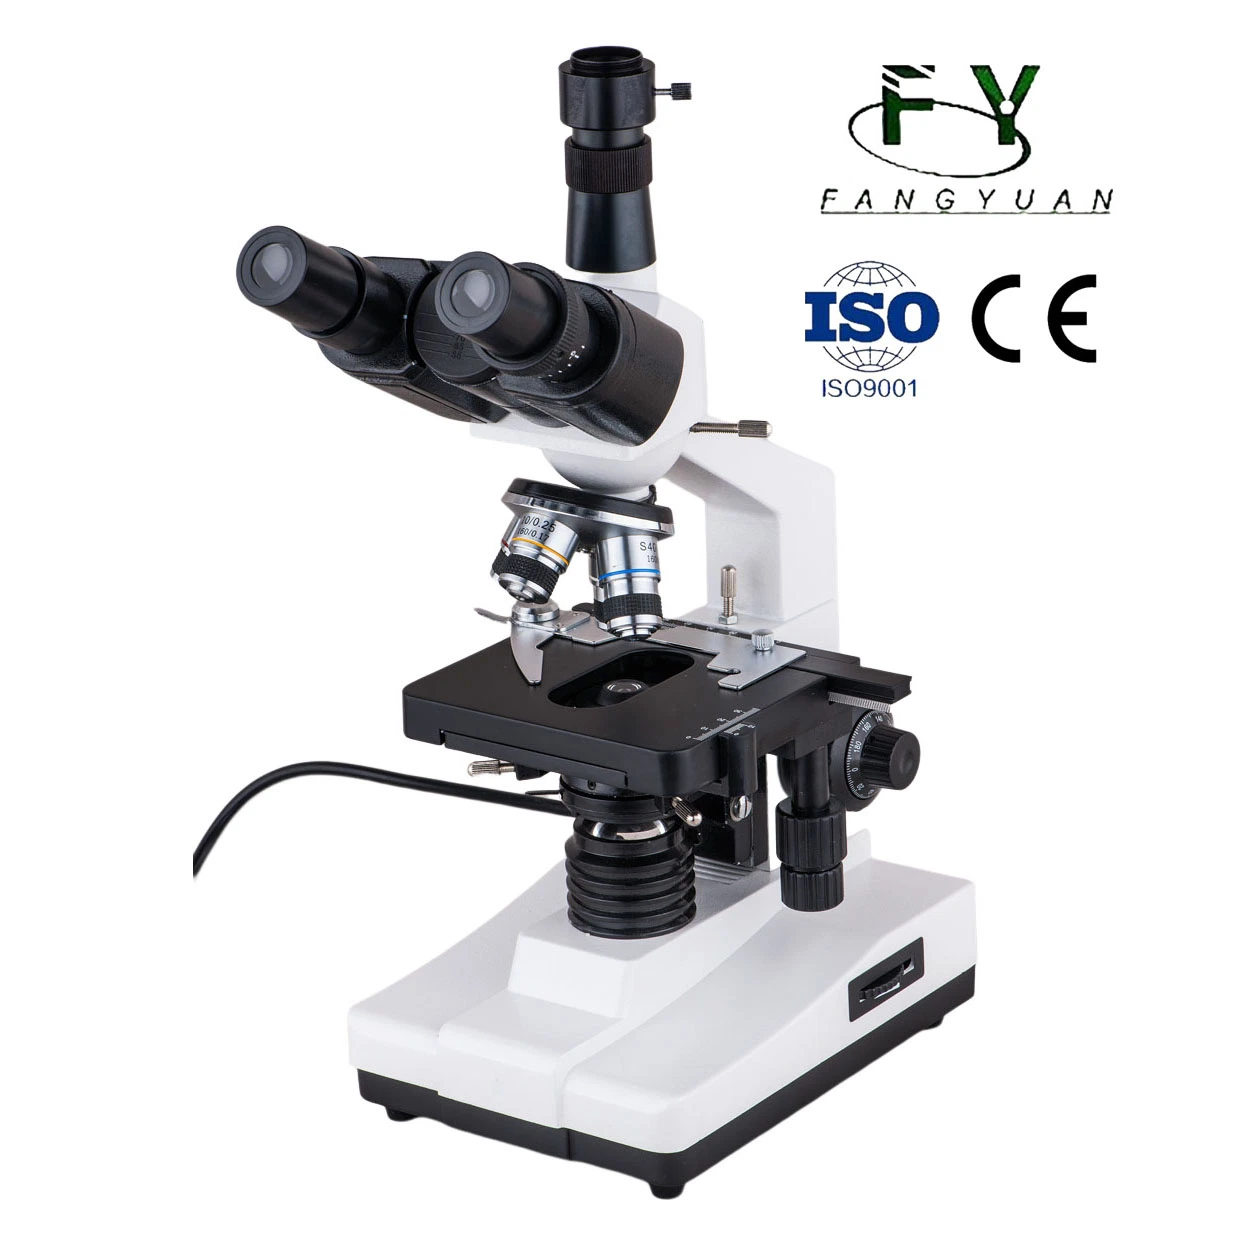 40X-1600X Trinocular Stereo Optical Biological Microscope of Chinese Manufacture Xsp-100sm